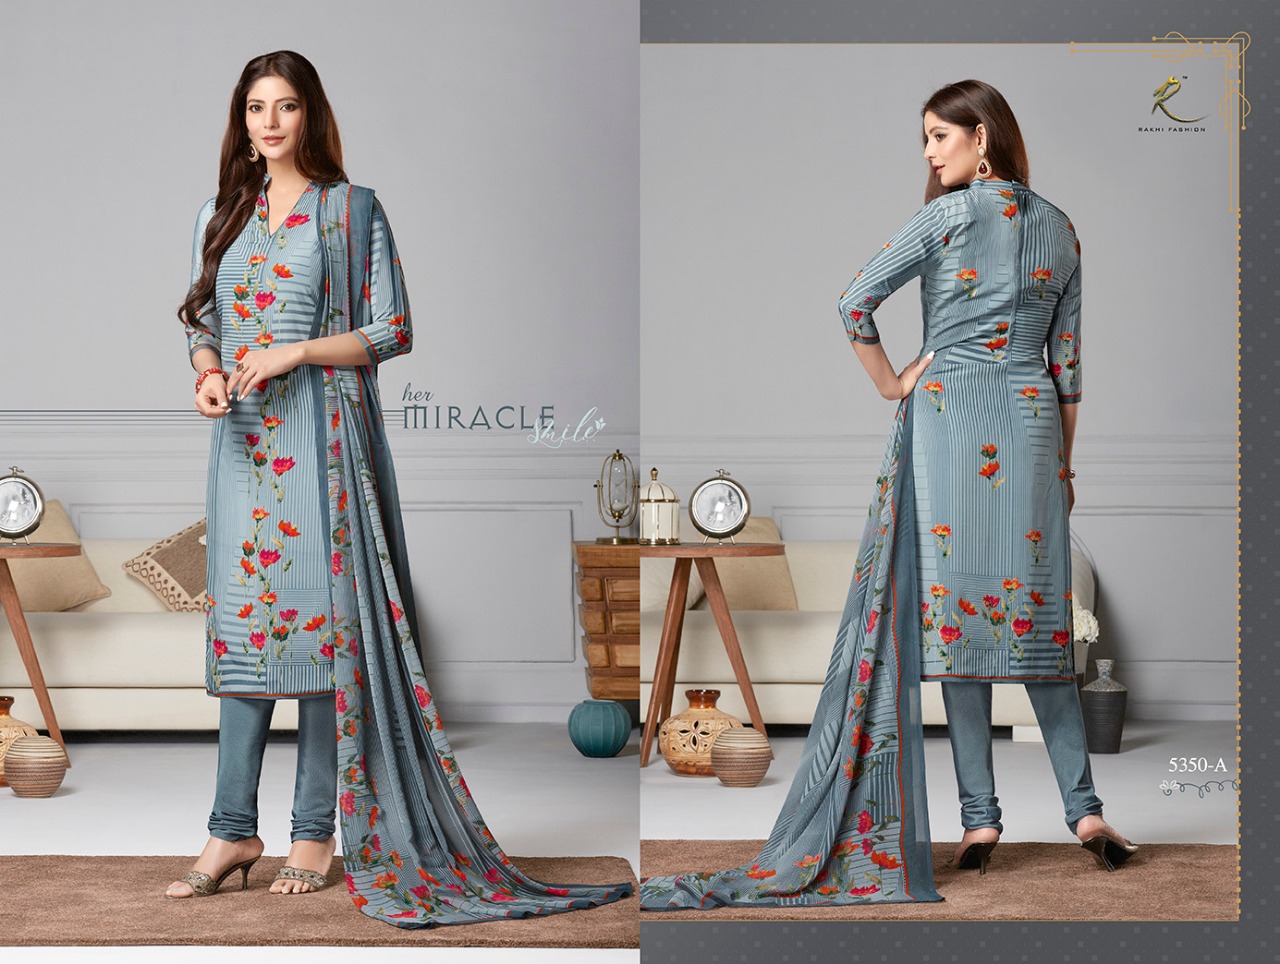 Candy Long Suit 5348 Series By Rakhi Fashion 5348-a To 5354-b Series Beautiful Suits Stylish Fancy Colorful Casual Wear & Ethnic Wear Collection Synthetic Crepe Printed Dresses At Wholesale Price